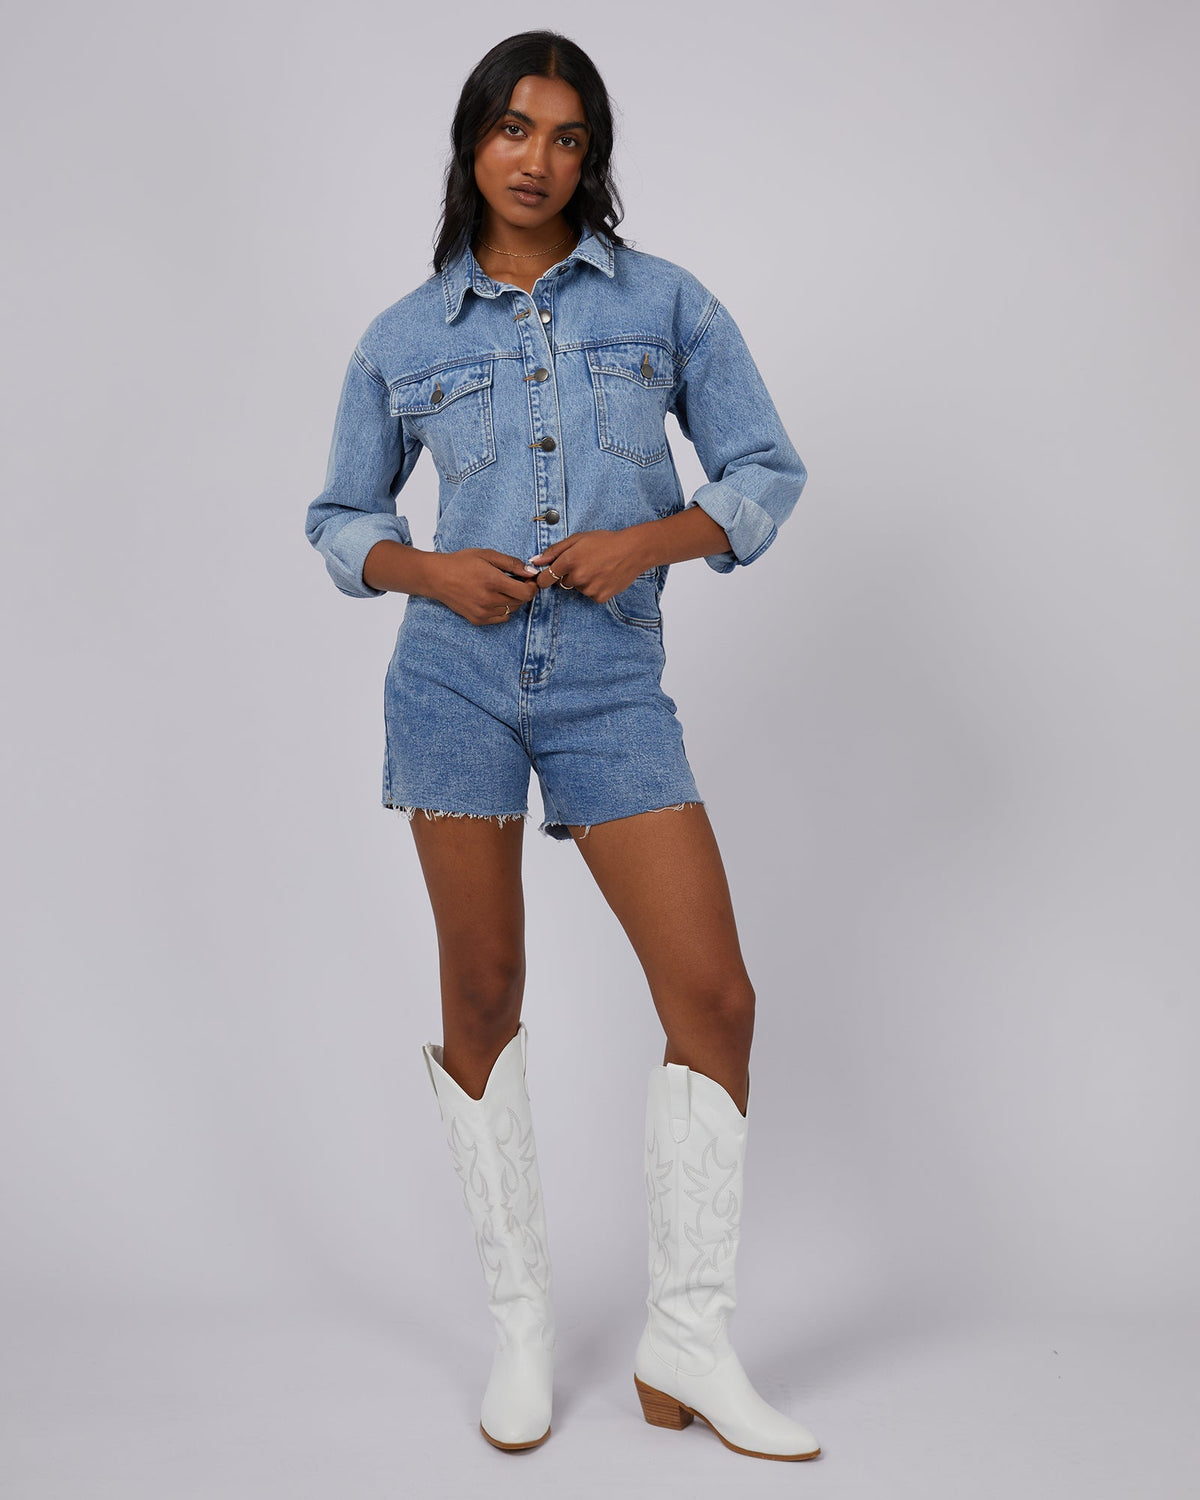 All About Eve-Banks Cropped Denim Jacket Light Blue-Edge Clothing